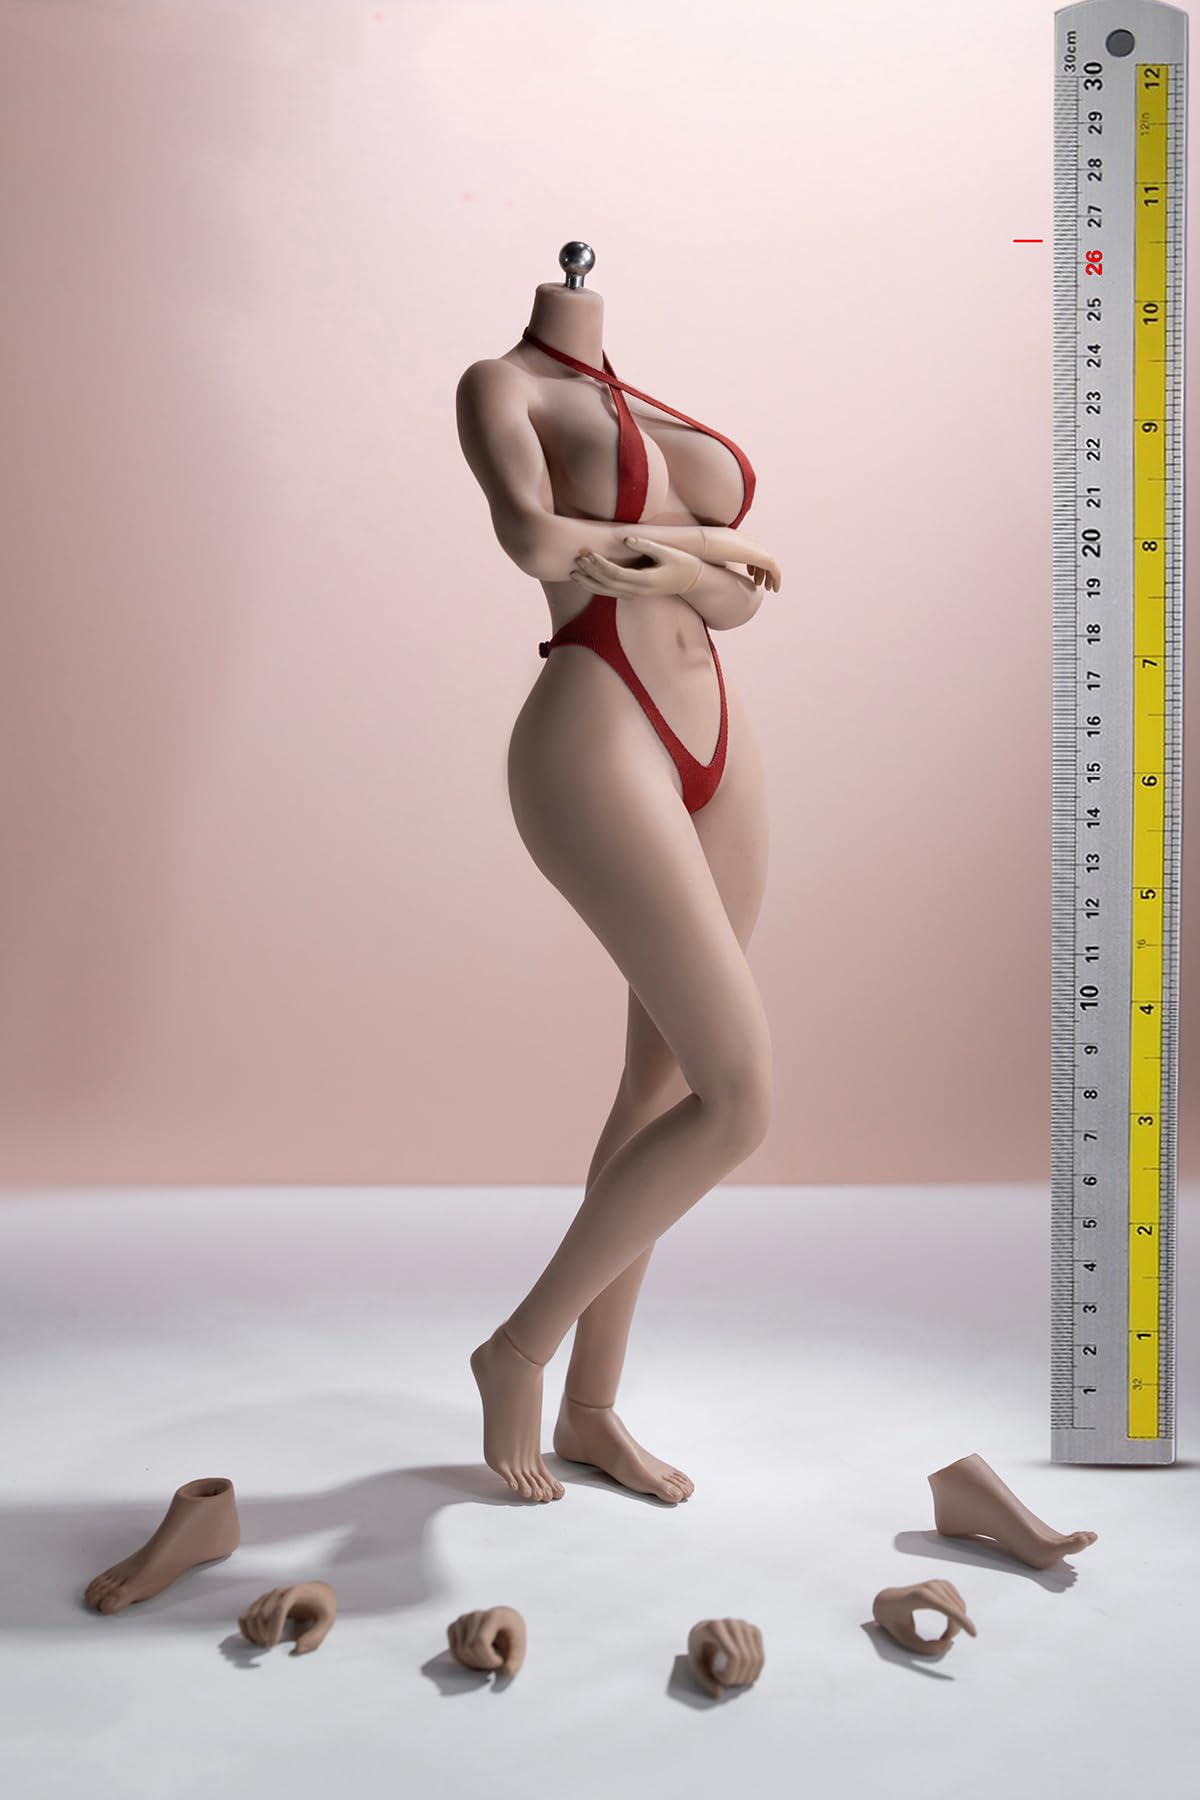 HiPlay TBLeague 1:6 Scale Female Seamless Action Figure Body -Tall and Plump Body Shape (S53A,Suntan,Without Head)